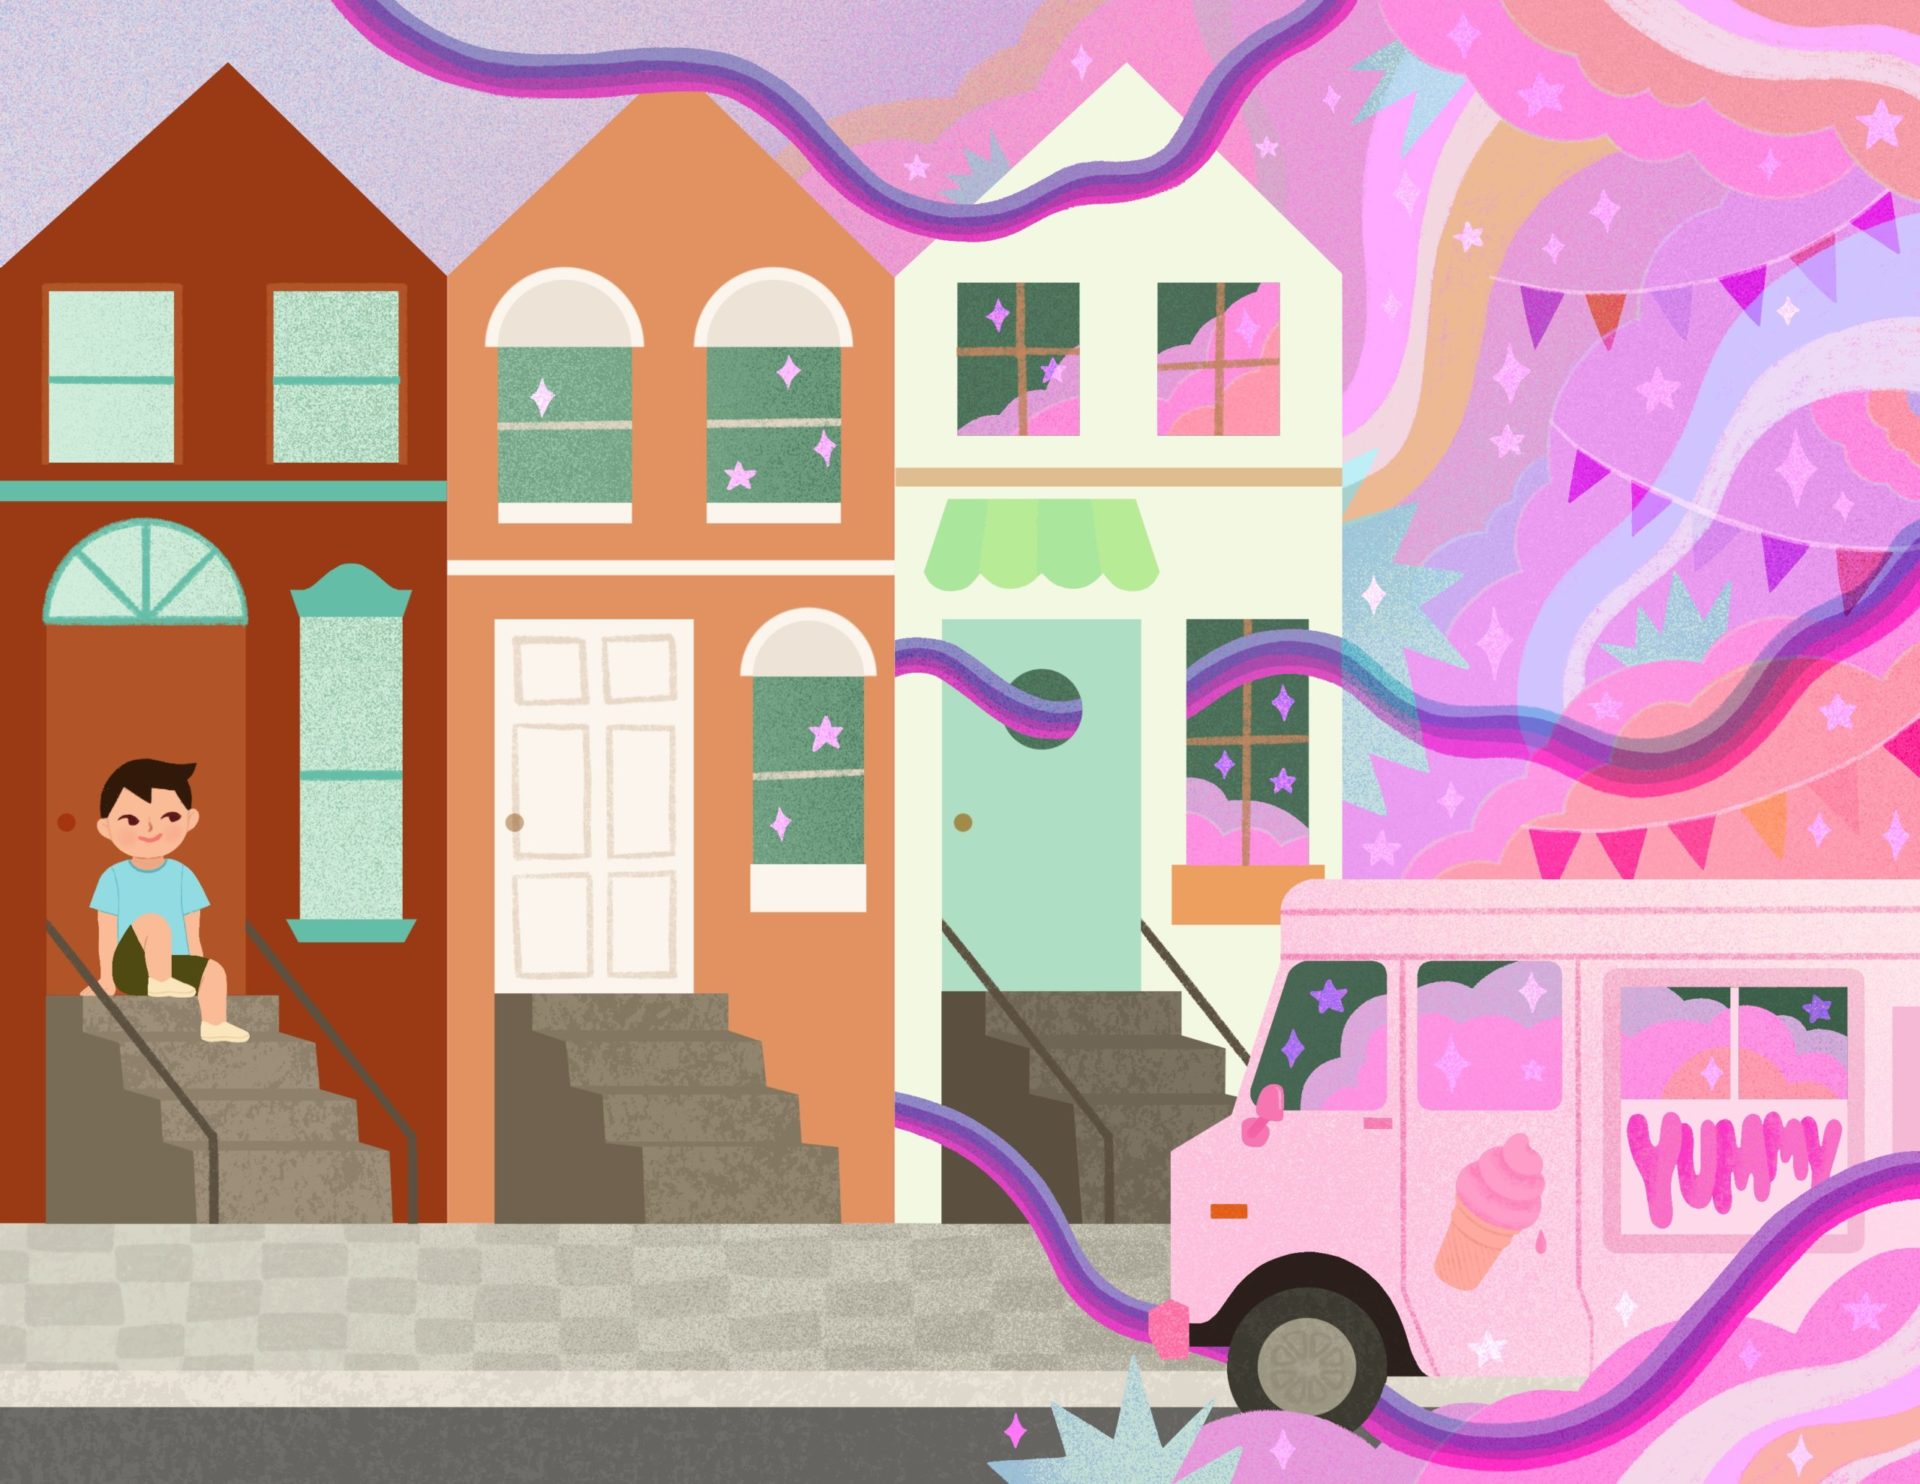 Illustration of a young boy sitting on stairs in a colorful neighborhood with whimsical buildings and an ice cream truck nearby.